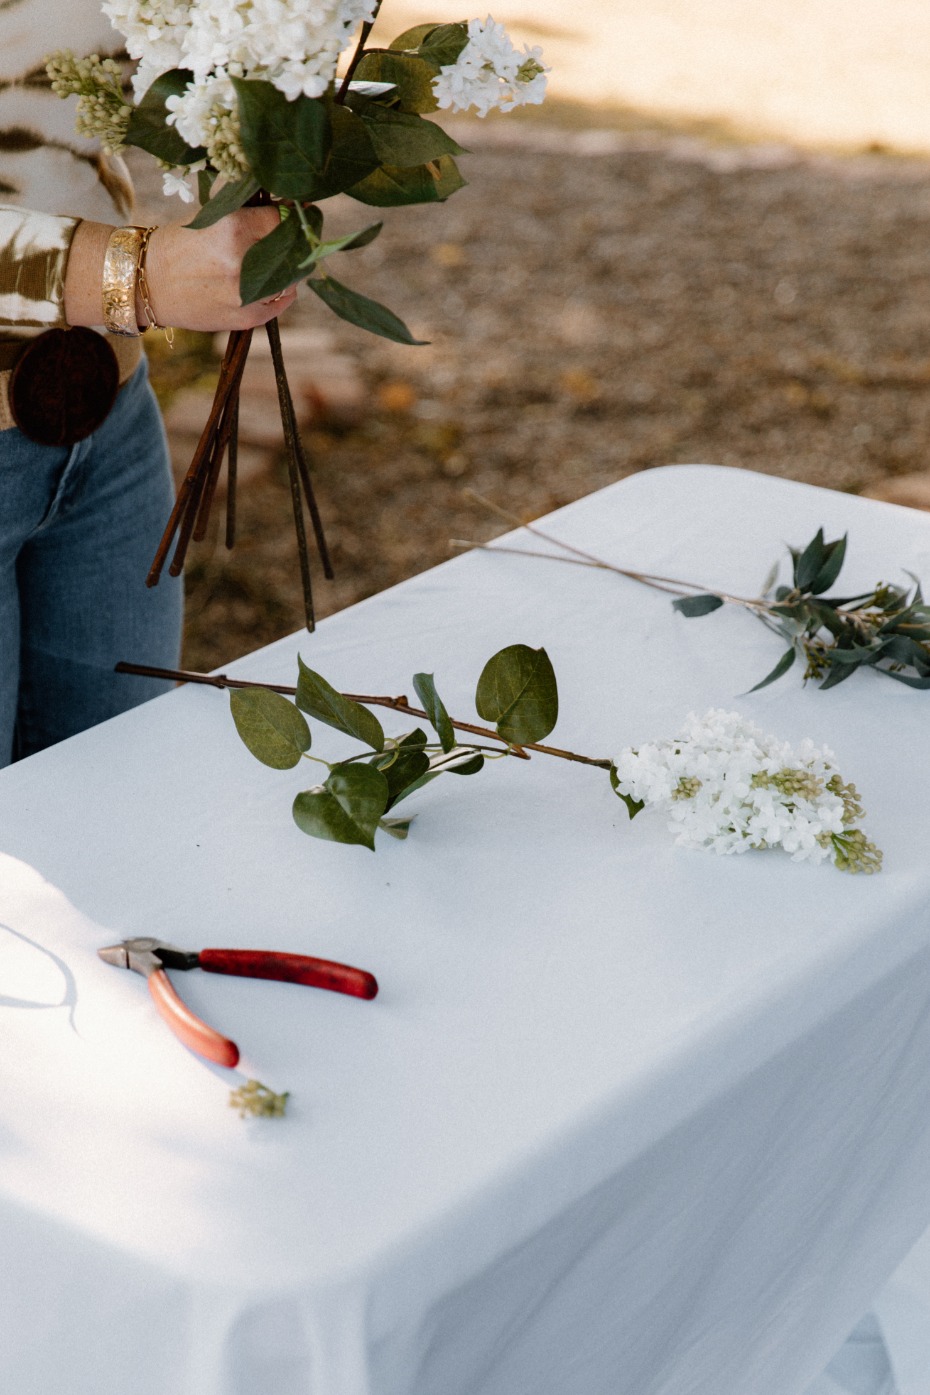 This Simple Bouquet DIY From Afloral Will Stun At Your Classic Wedding